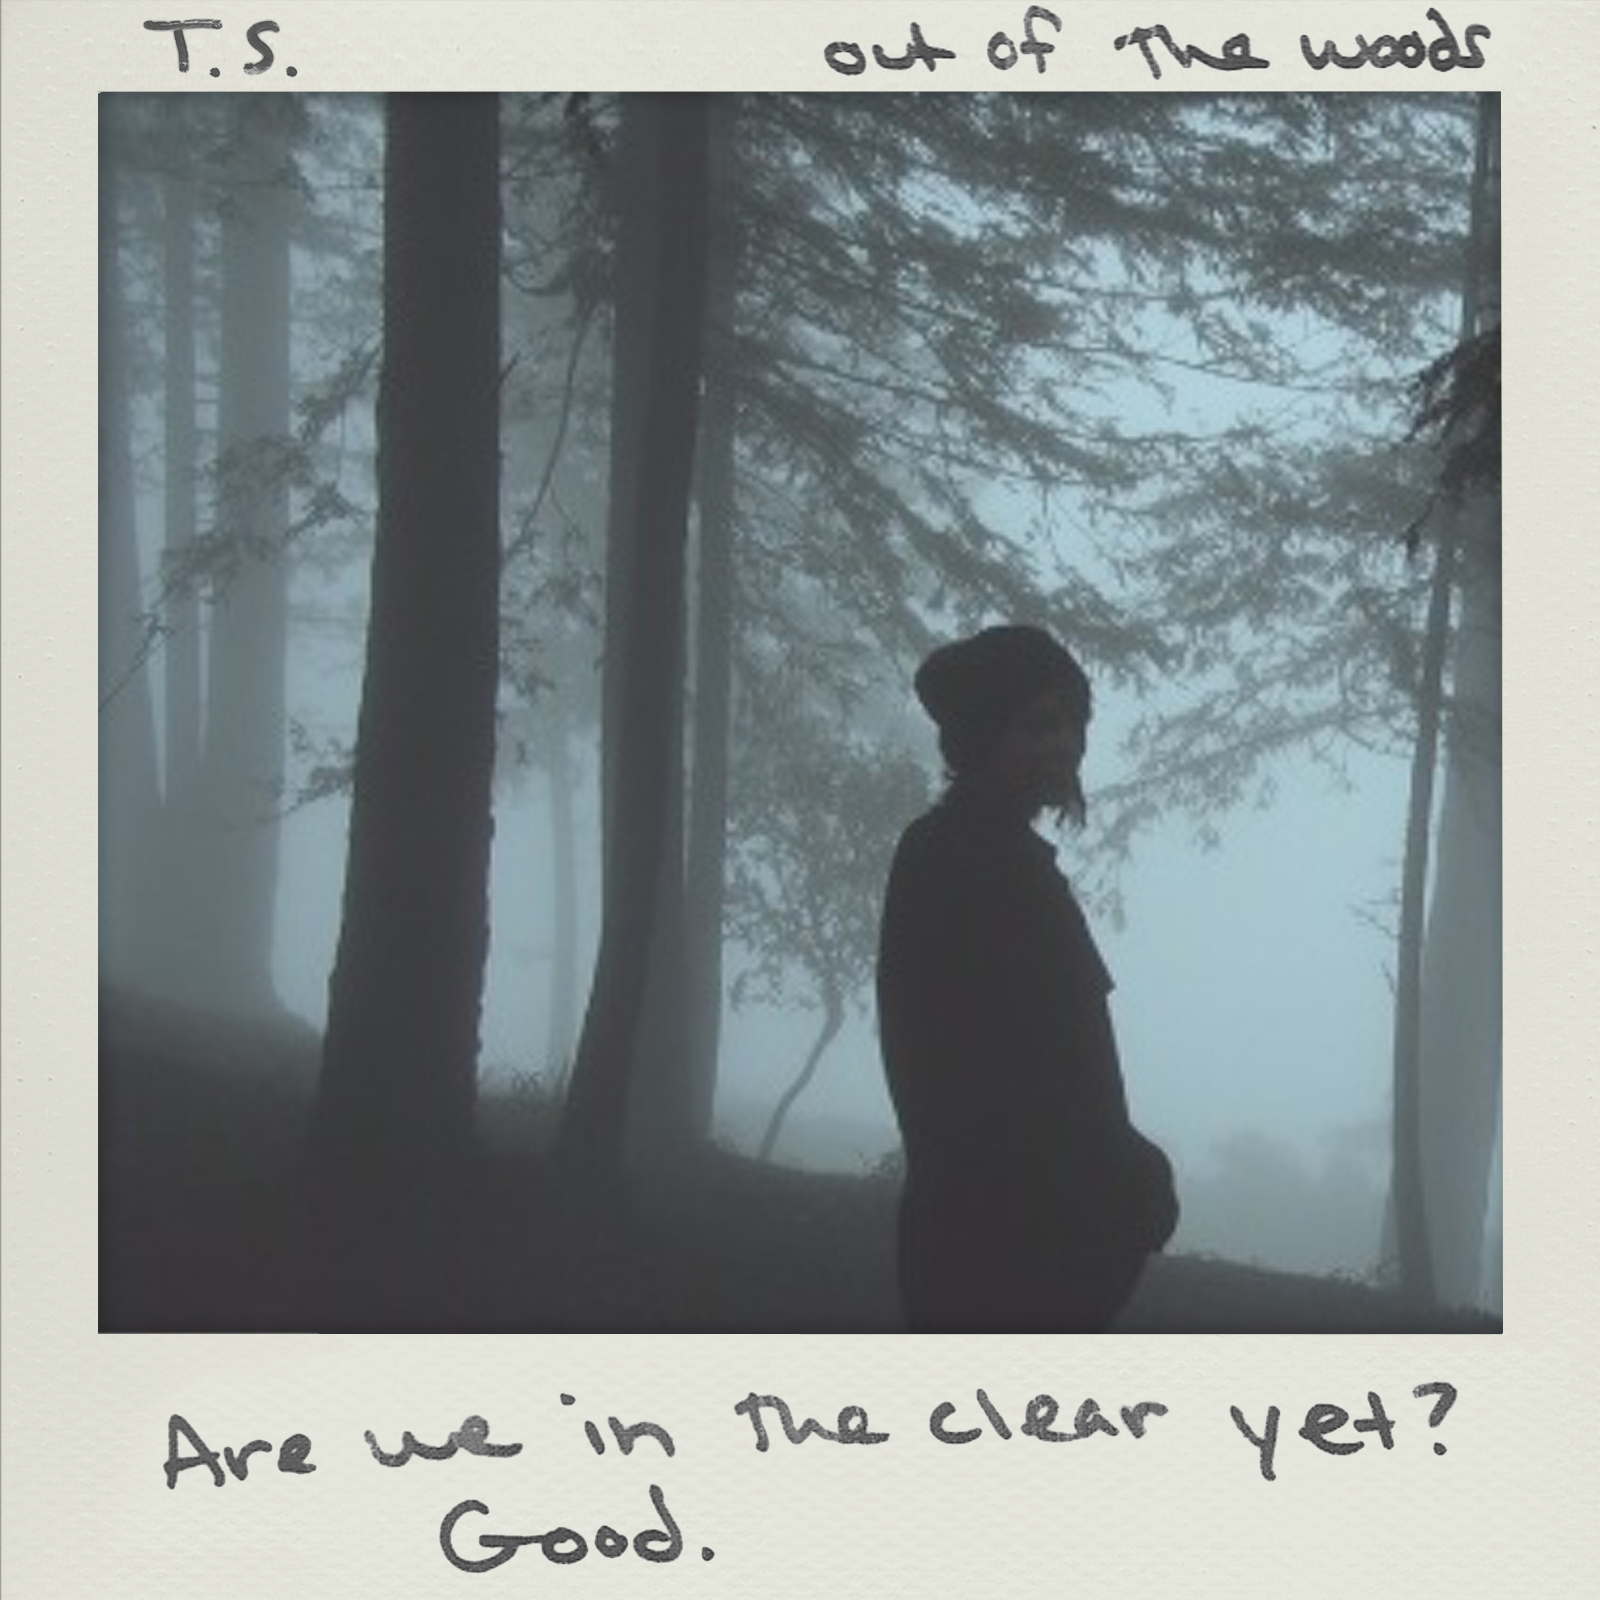 out_of_the_woods___taylor_swift__single_cover_art__by_justinswift13-d94abpx.jpg